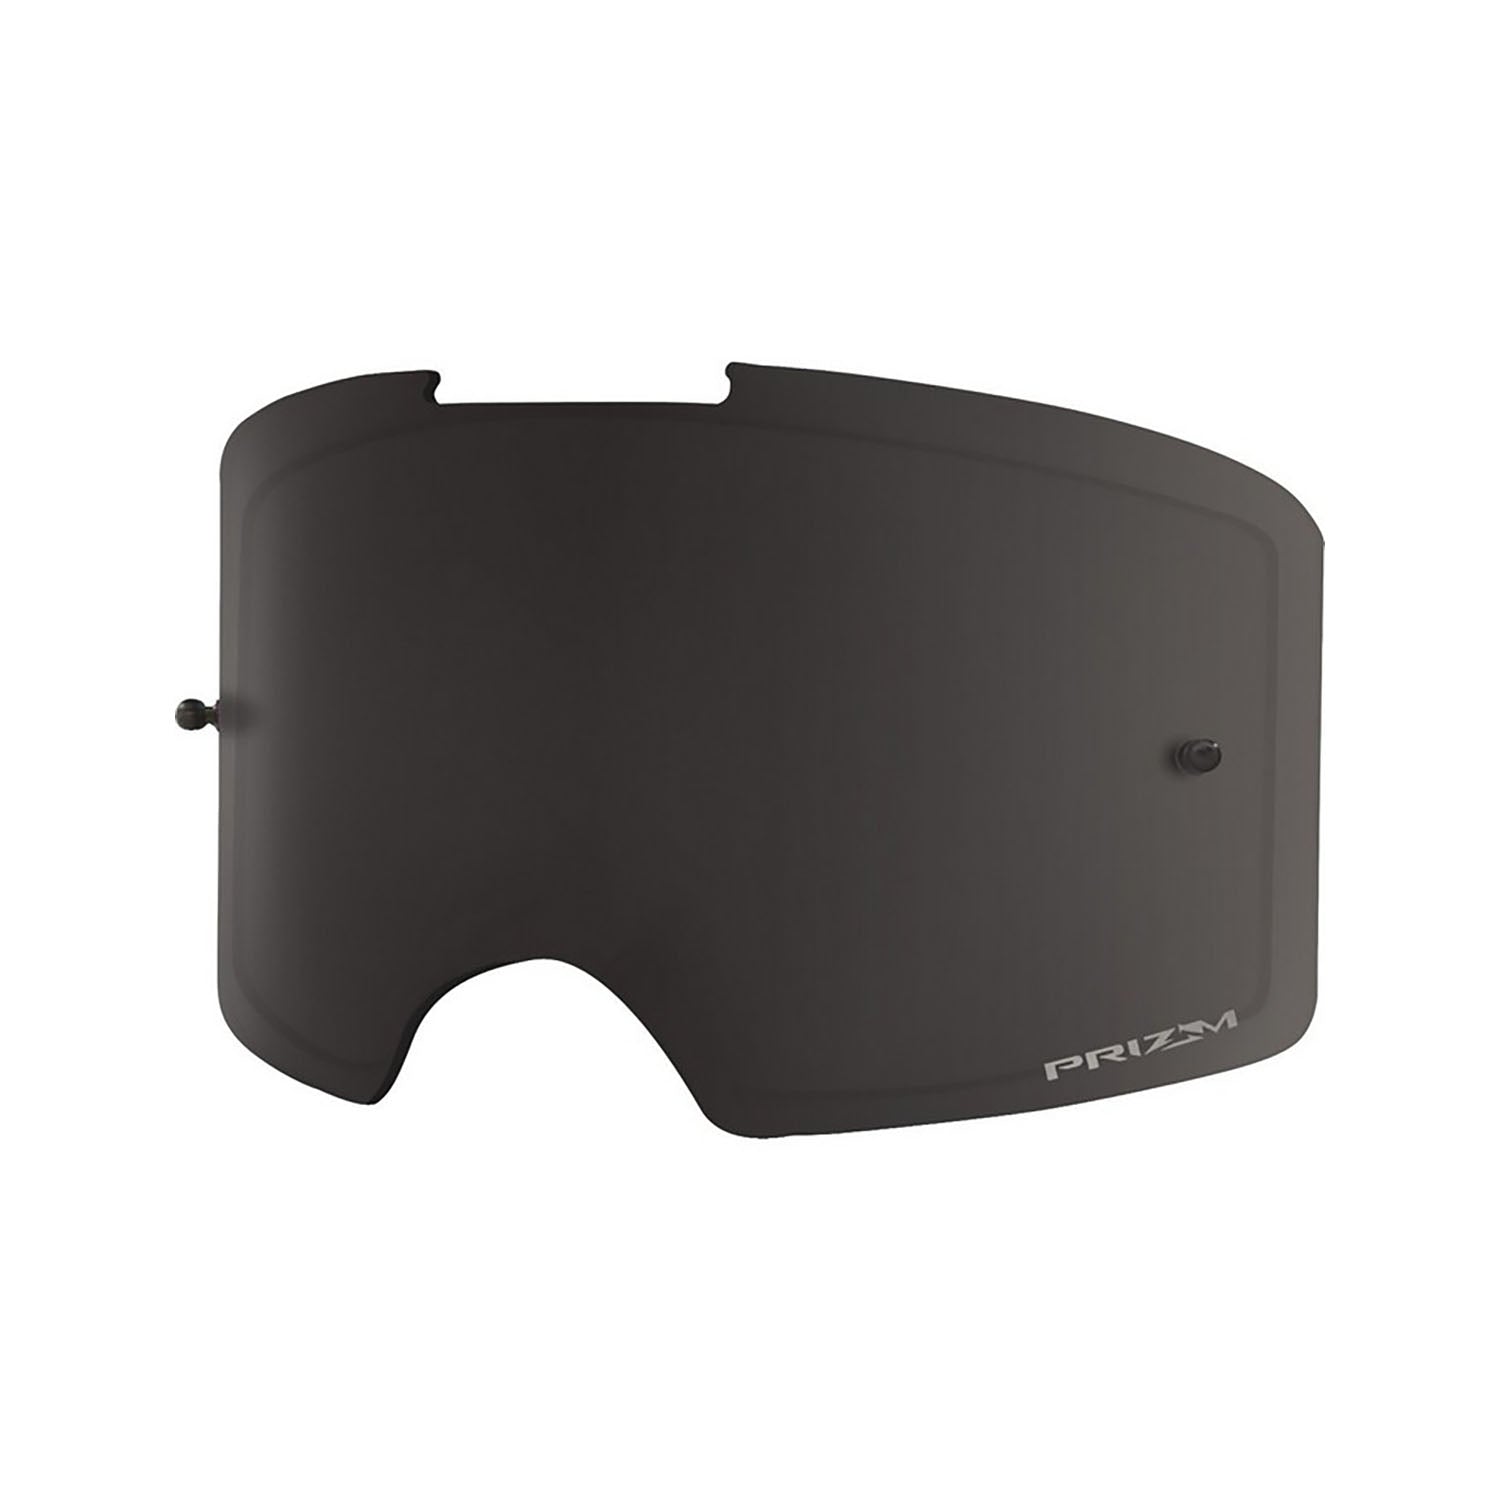 Oakley Front Line MX replacement lens in dark grey color, showcasing clarity and fit.